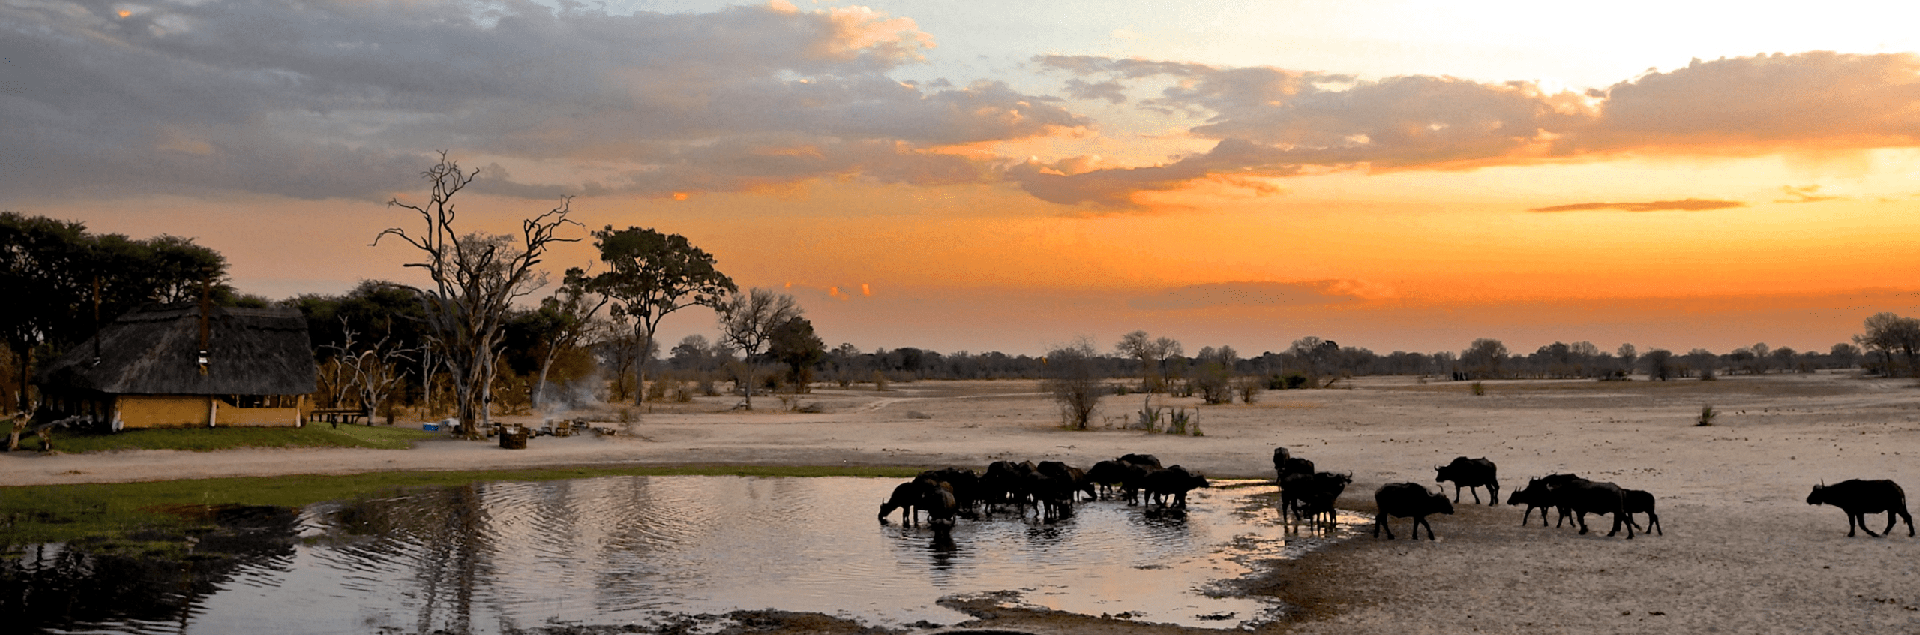 a herd of cattle standing next to a body of water.